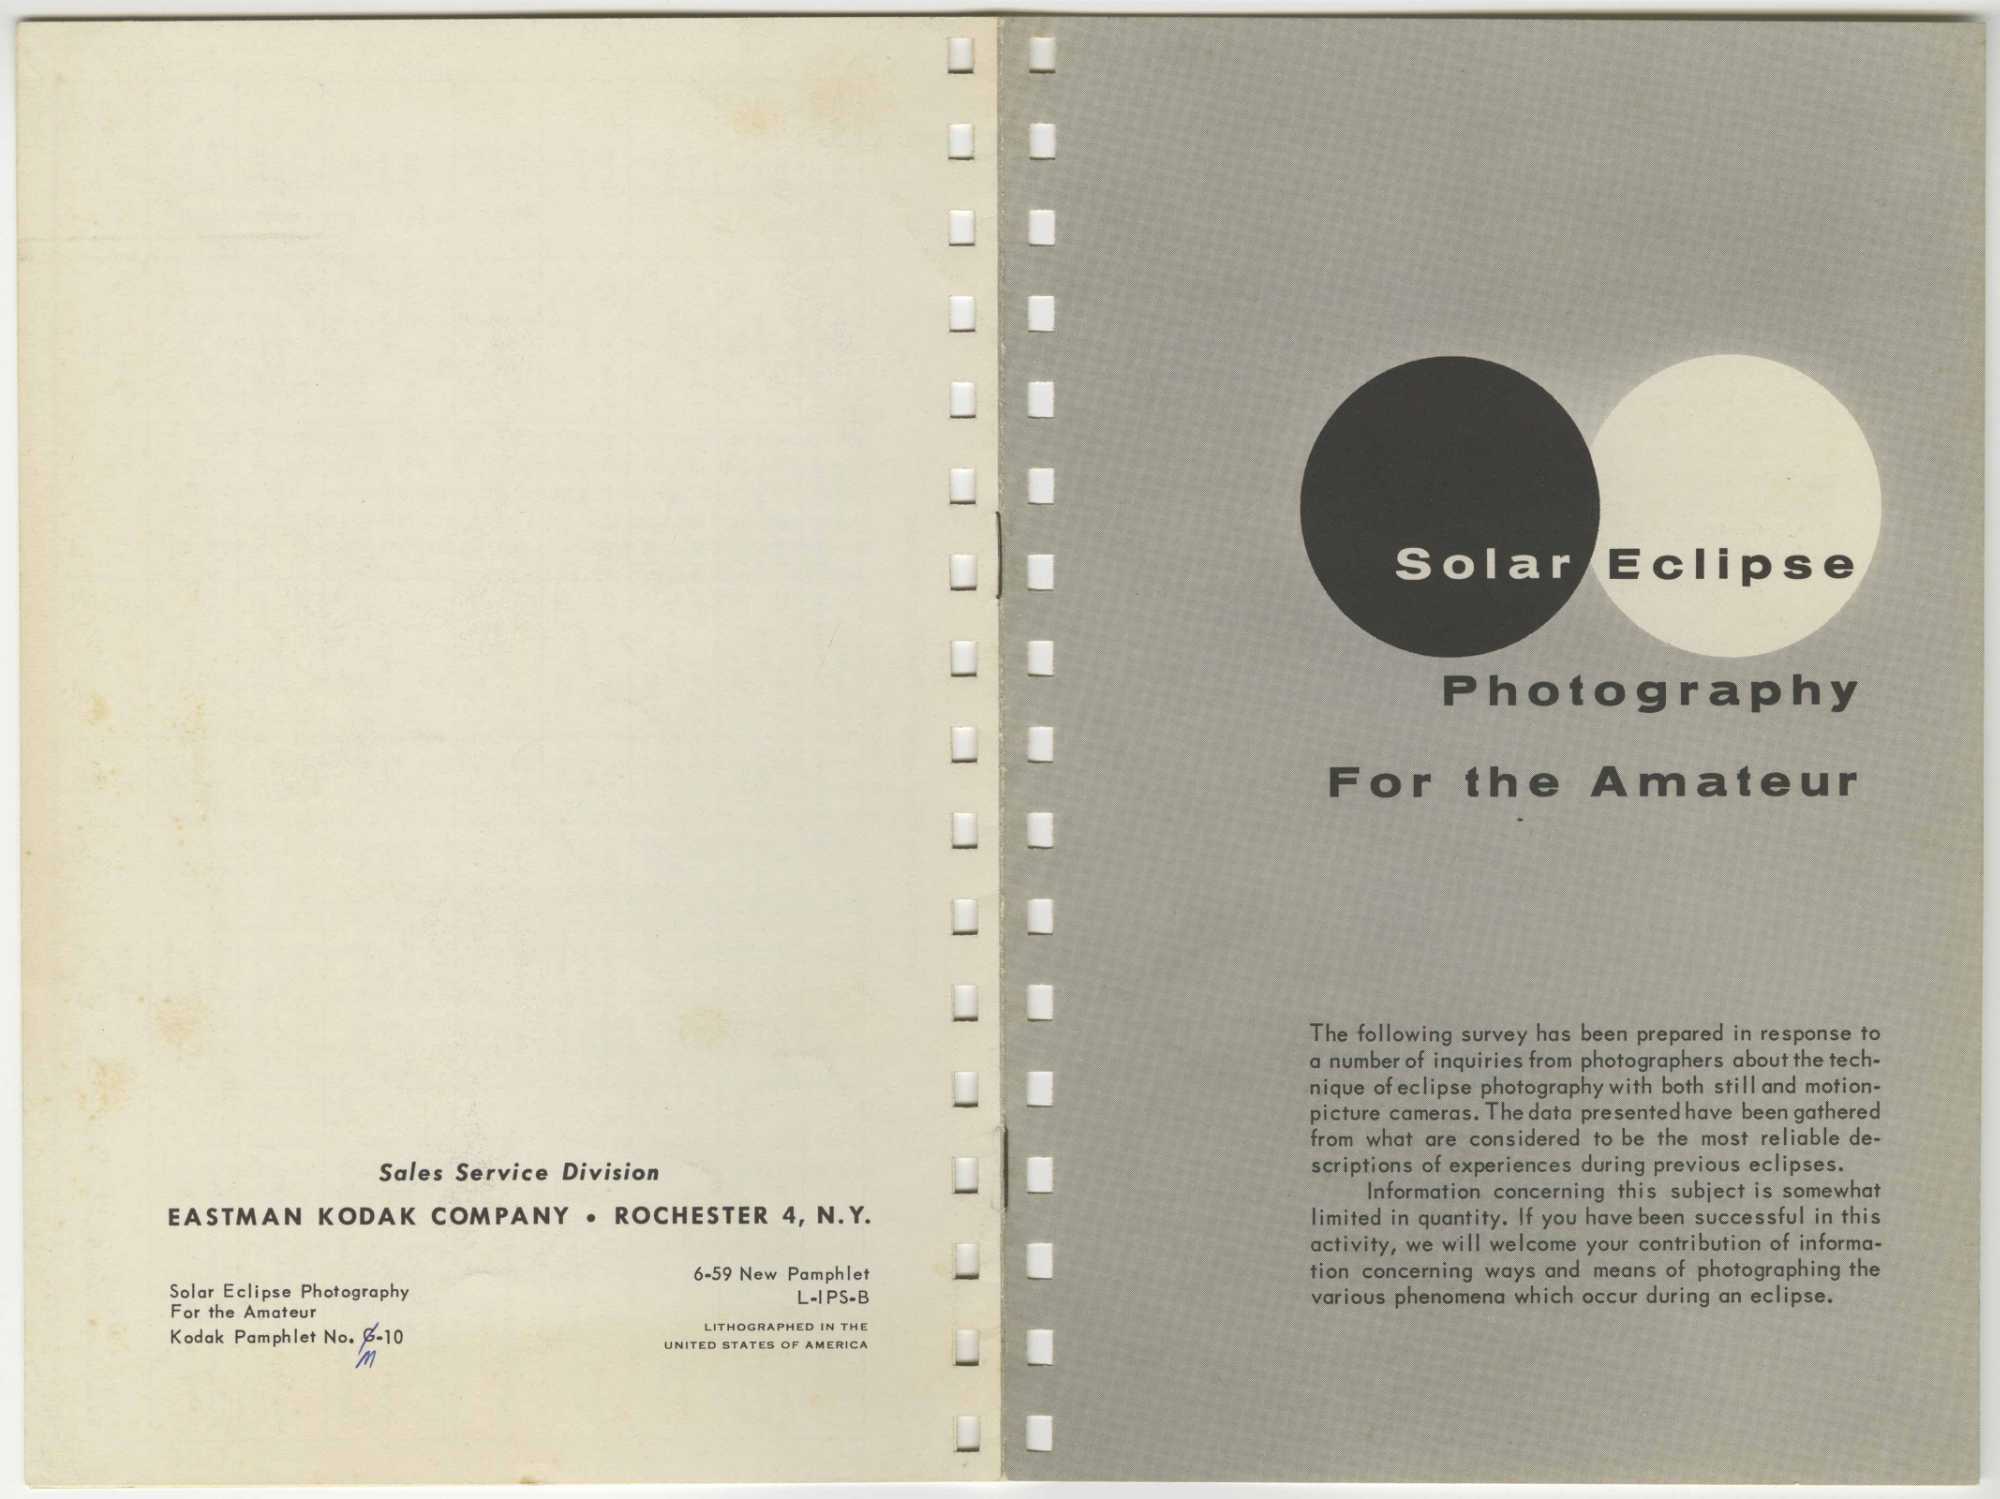 Front and back cover of a black-and-white pamphlet about solar eclipse photography created by the Eastman Kodak Company.